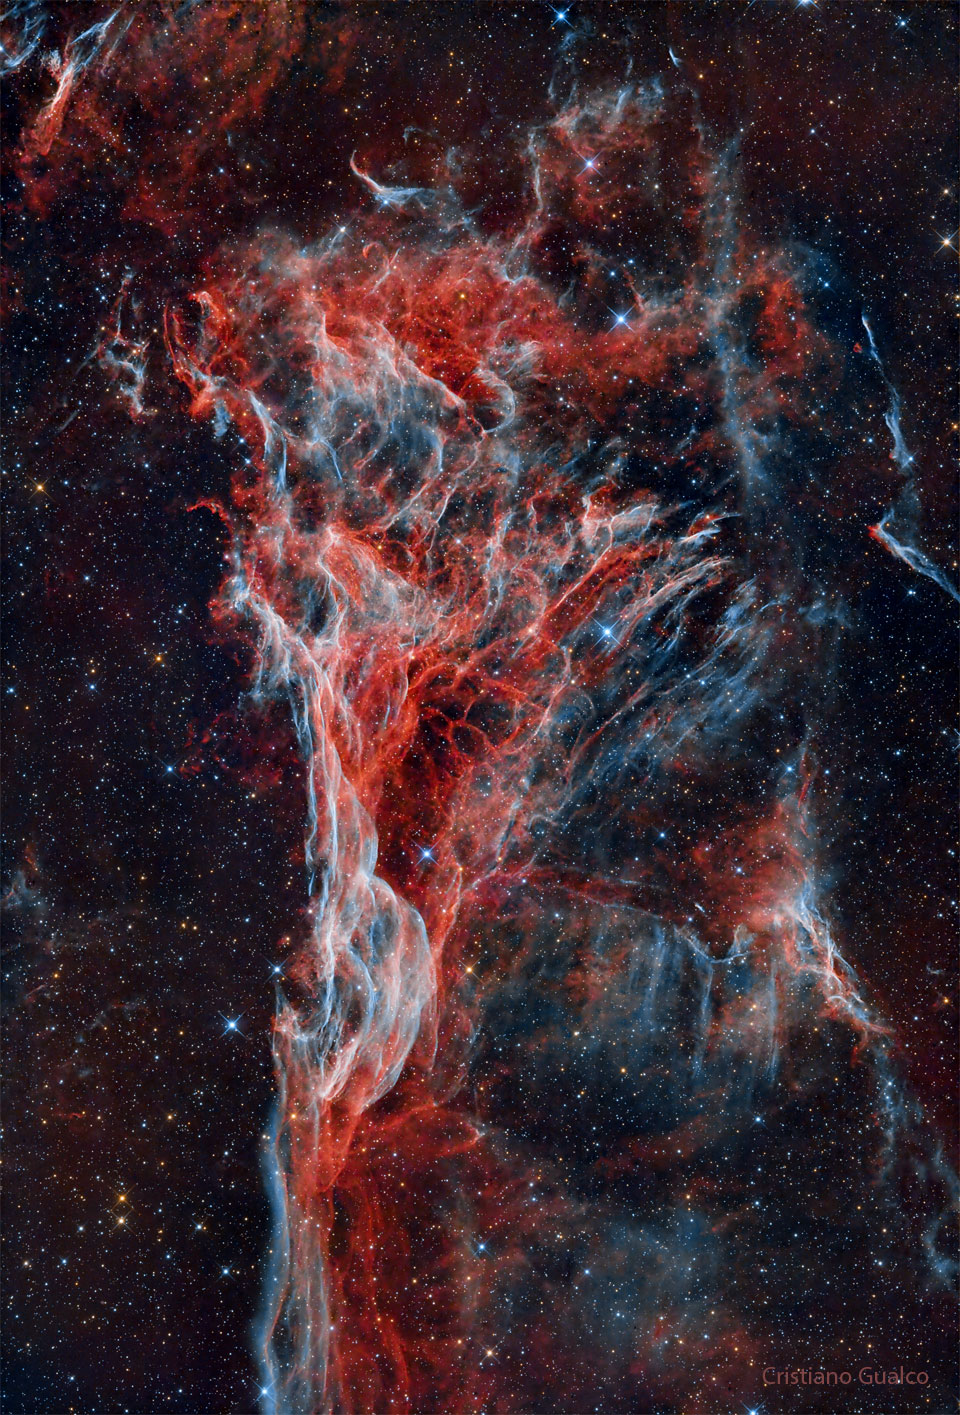 A nebula consisting of blue and red wisps starts 
thin at the image bottom but expands into a triangle
at the image top.
Please see the explanation for more detailed information.